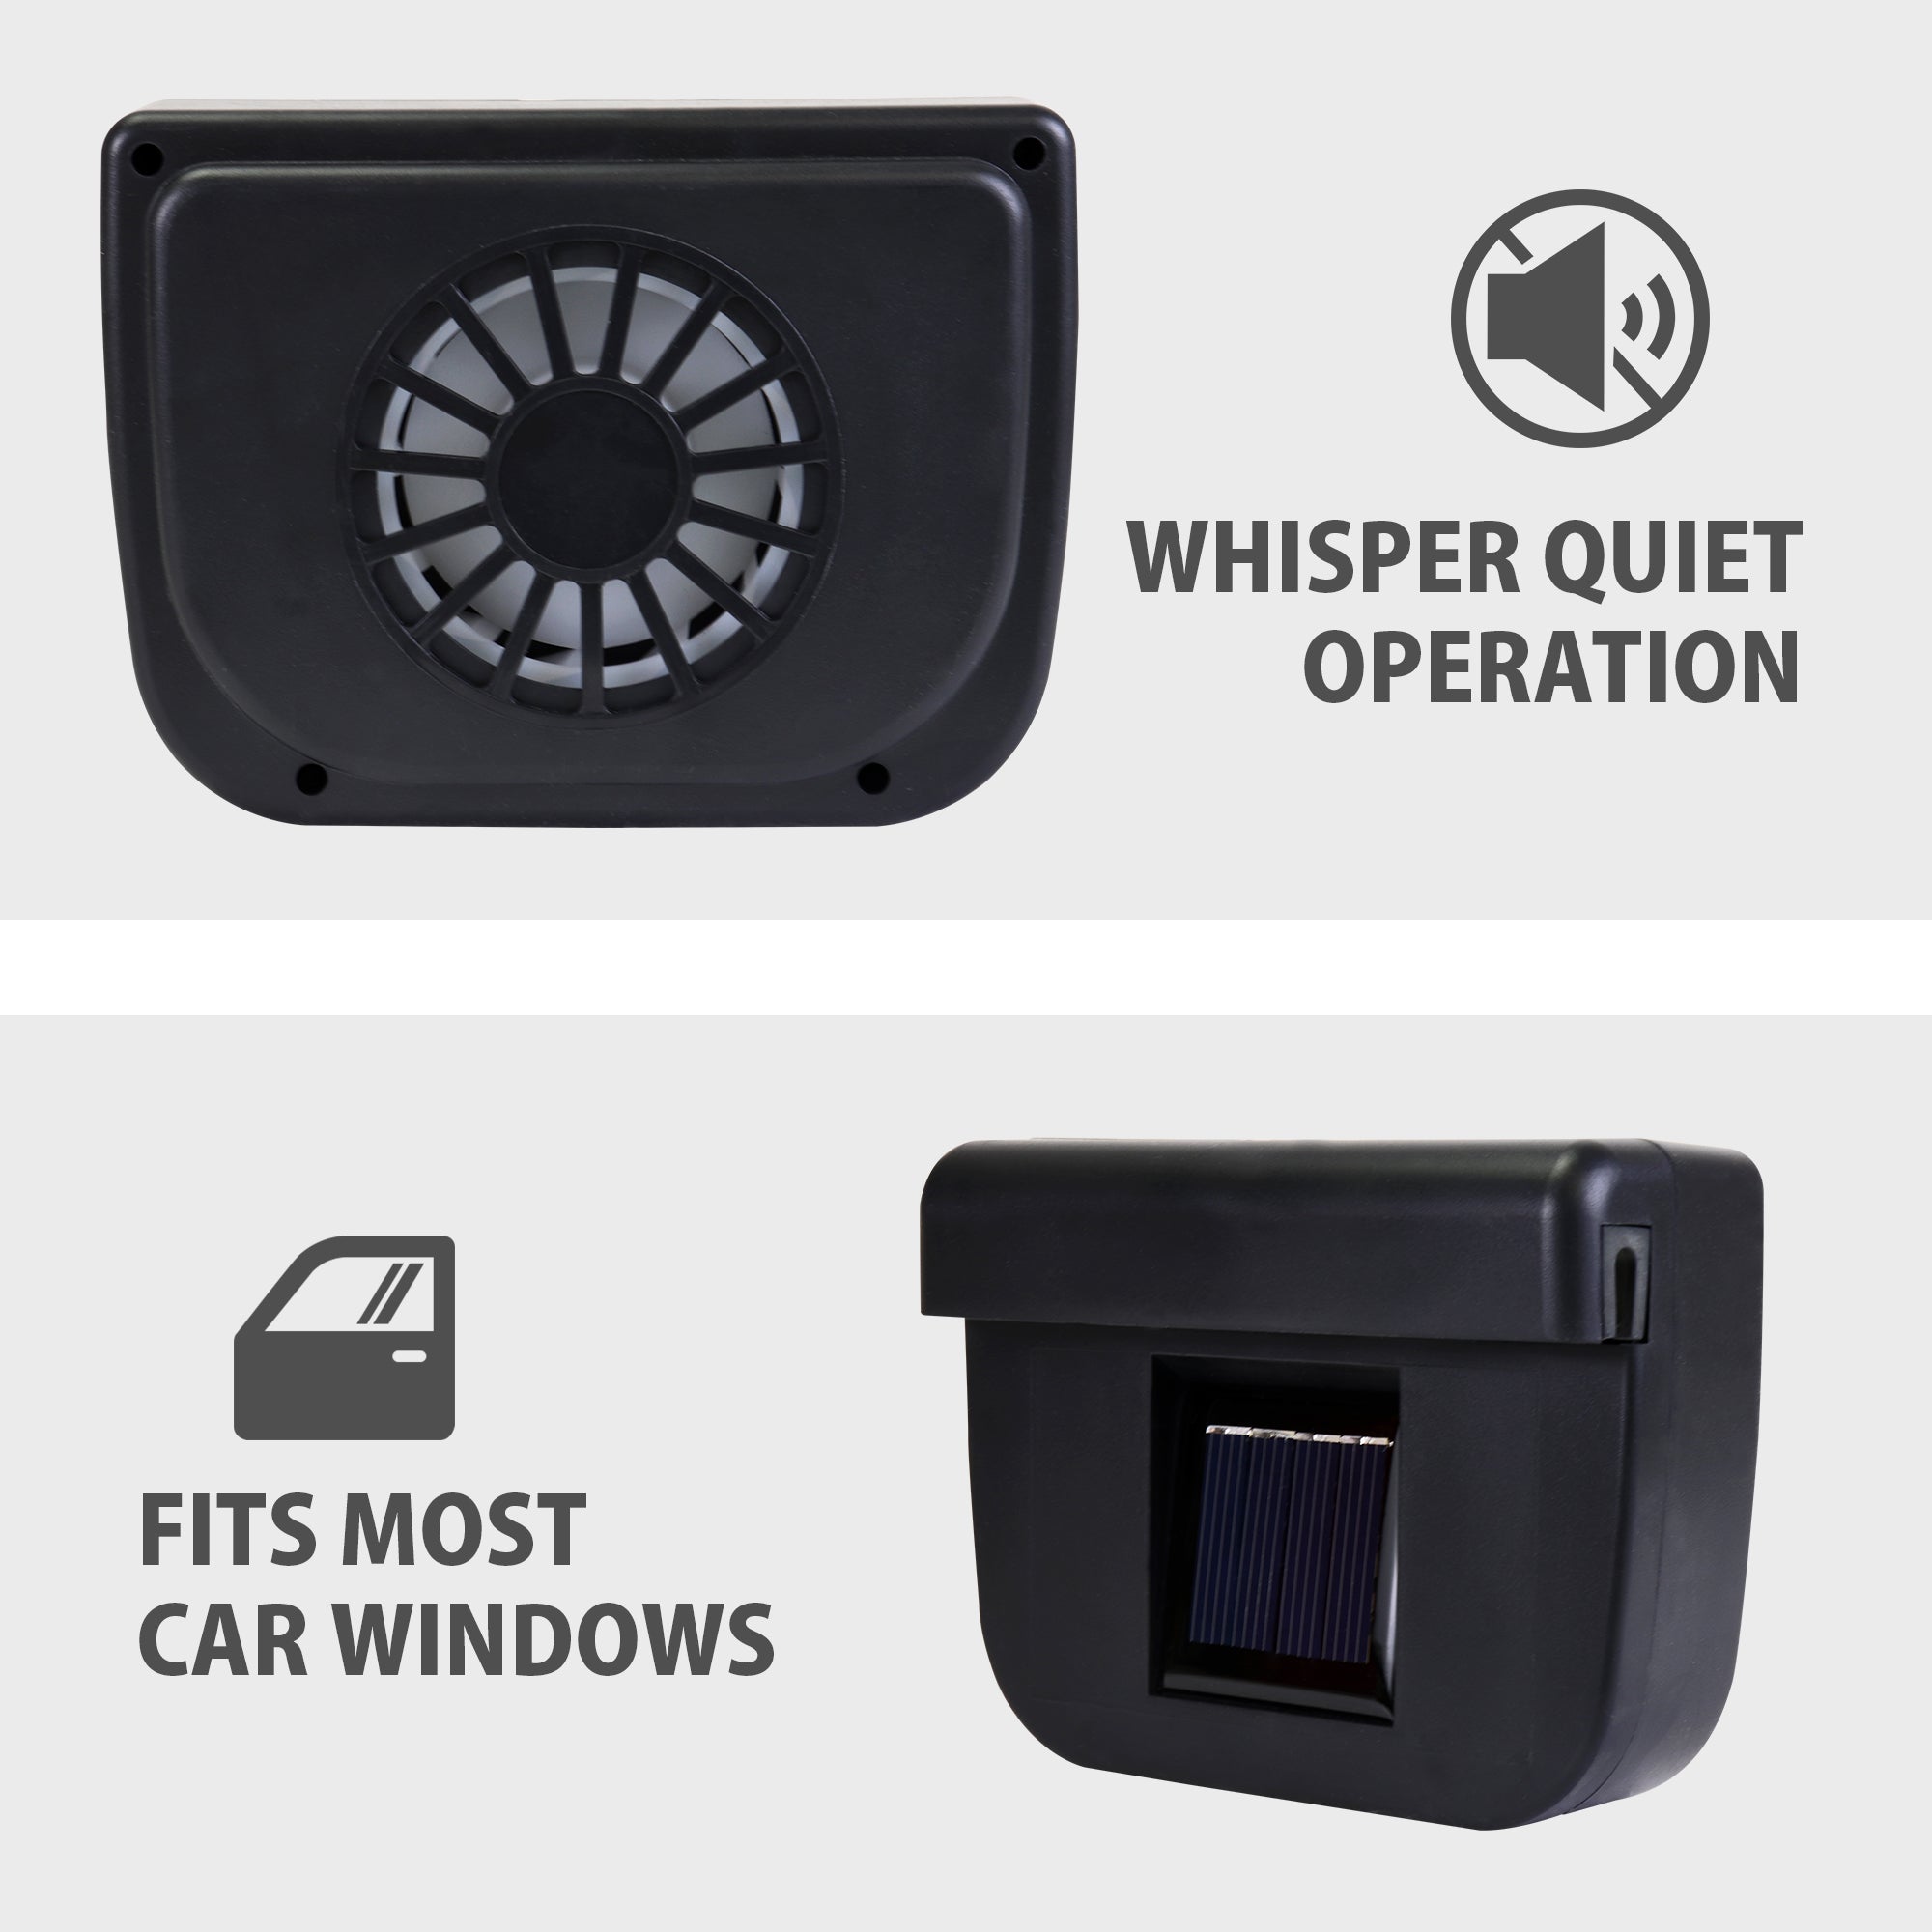 On the top is a front view of the AutoKool automotive window fan on a gray background with text and icon to the right reading, "Whisper quiet operation." On the bottom is a back view of the AutoKool automotive window fan showing the solar panel on a gray background with text and icon to the left reading, "Fits most car windows"